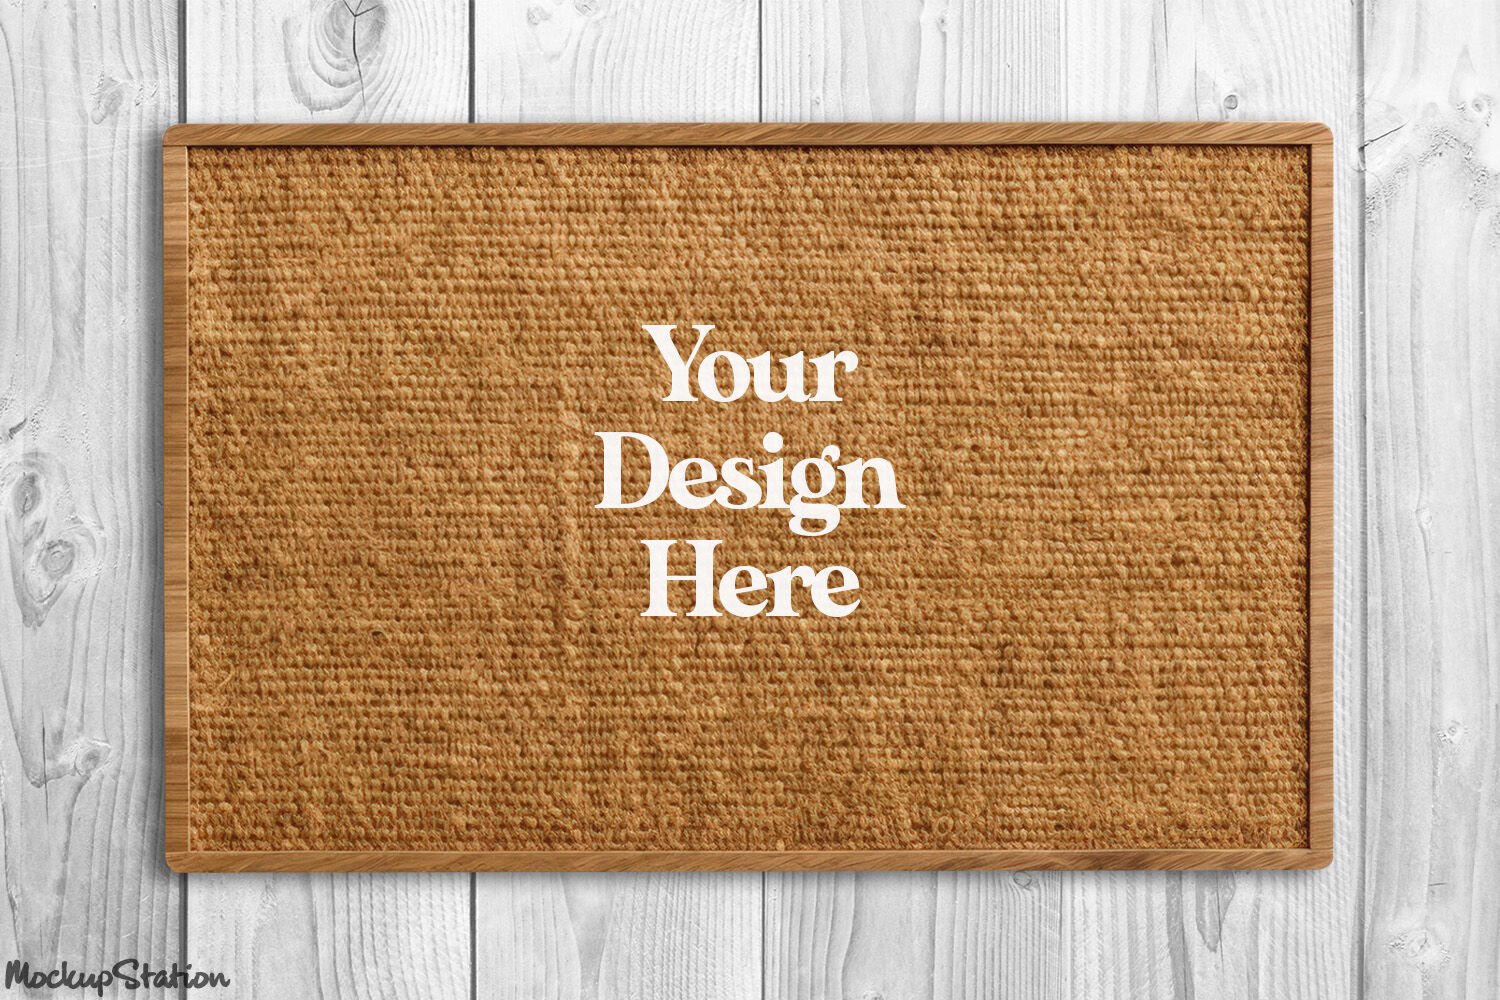 Welcome mat clipart. Free download transparent .PNG